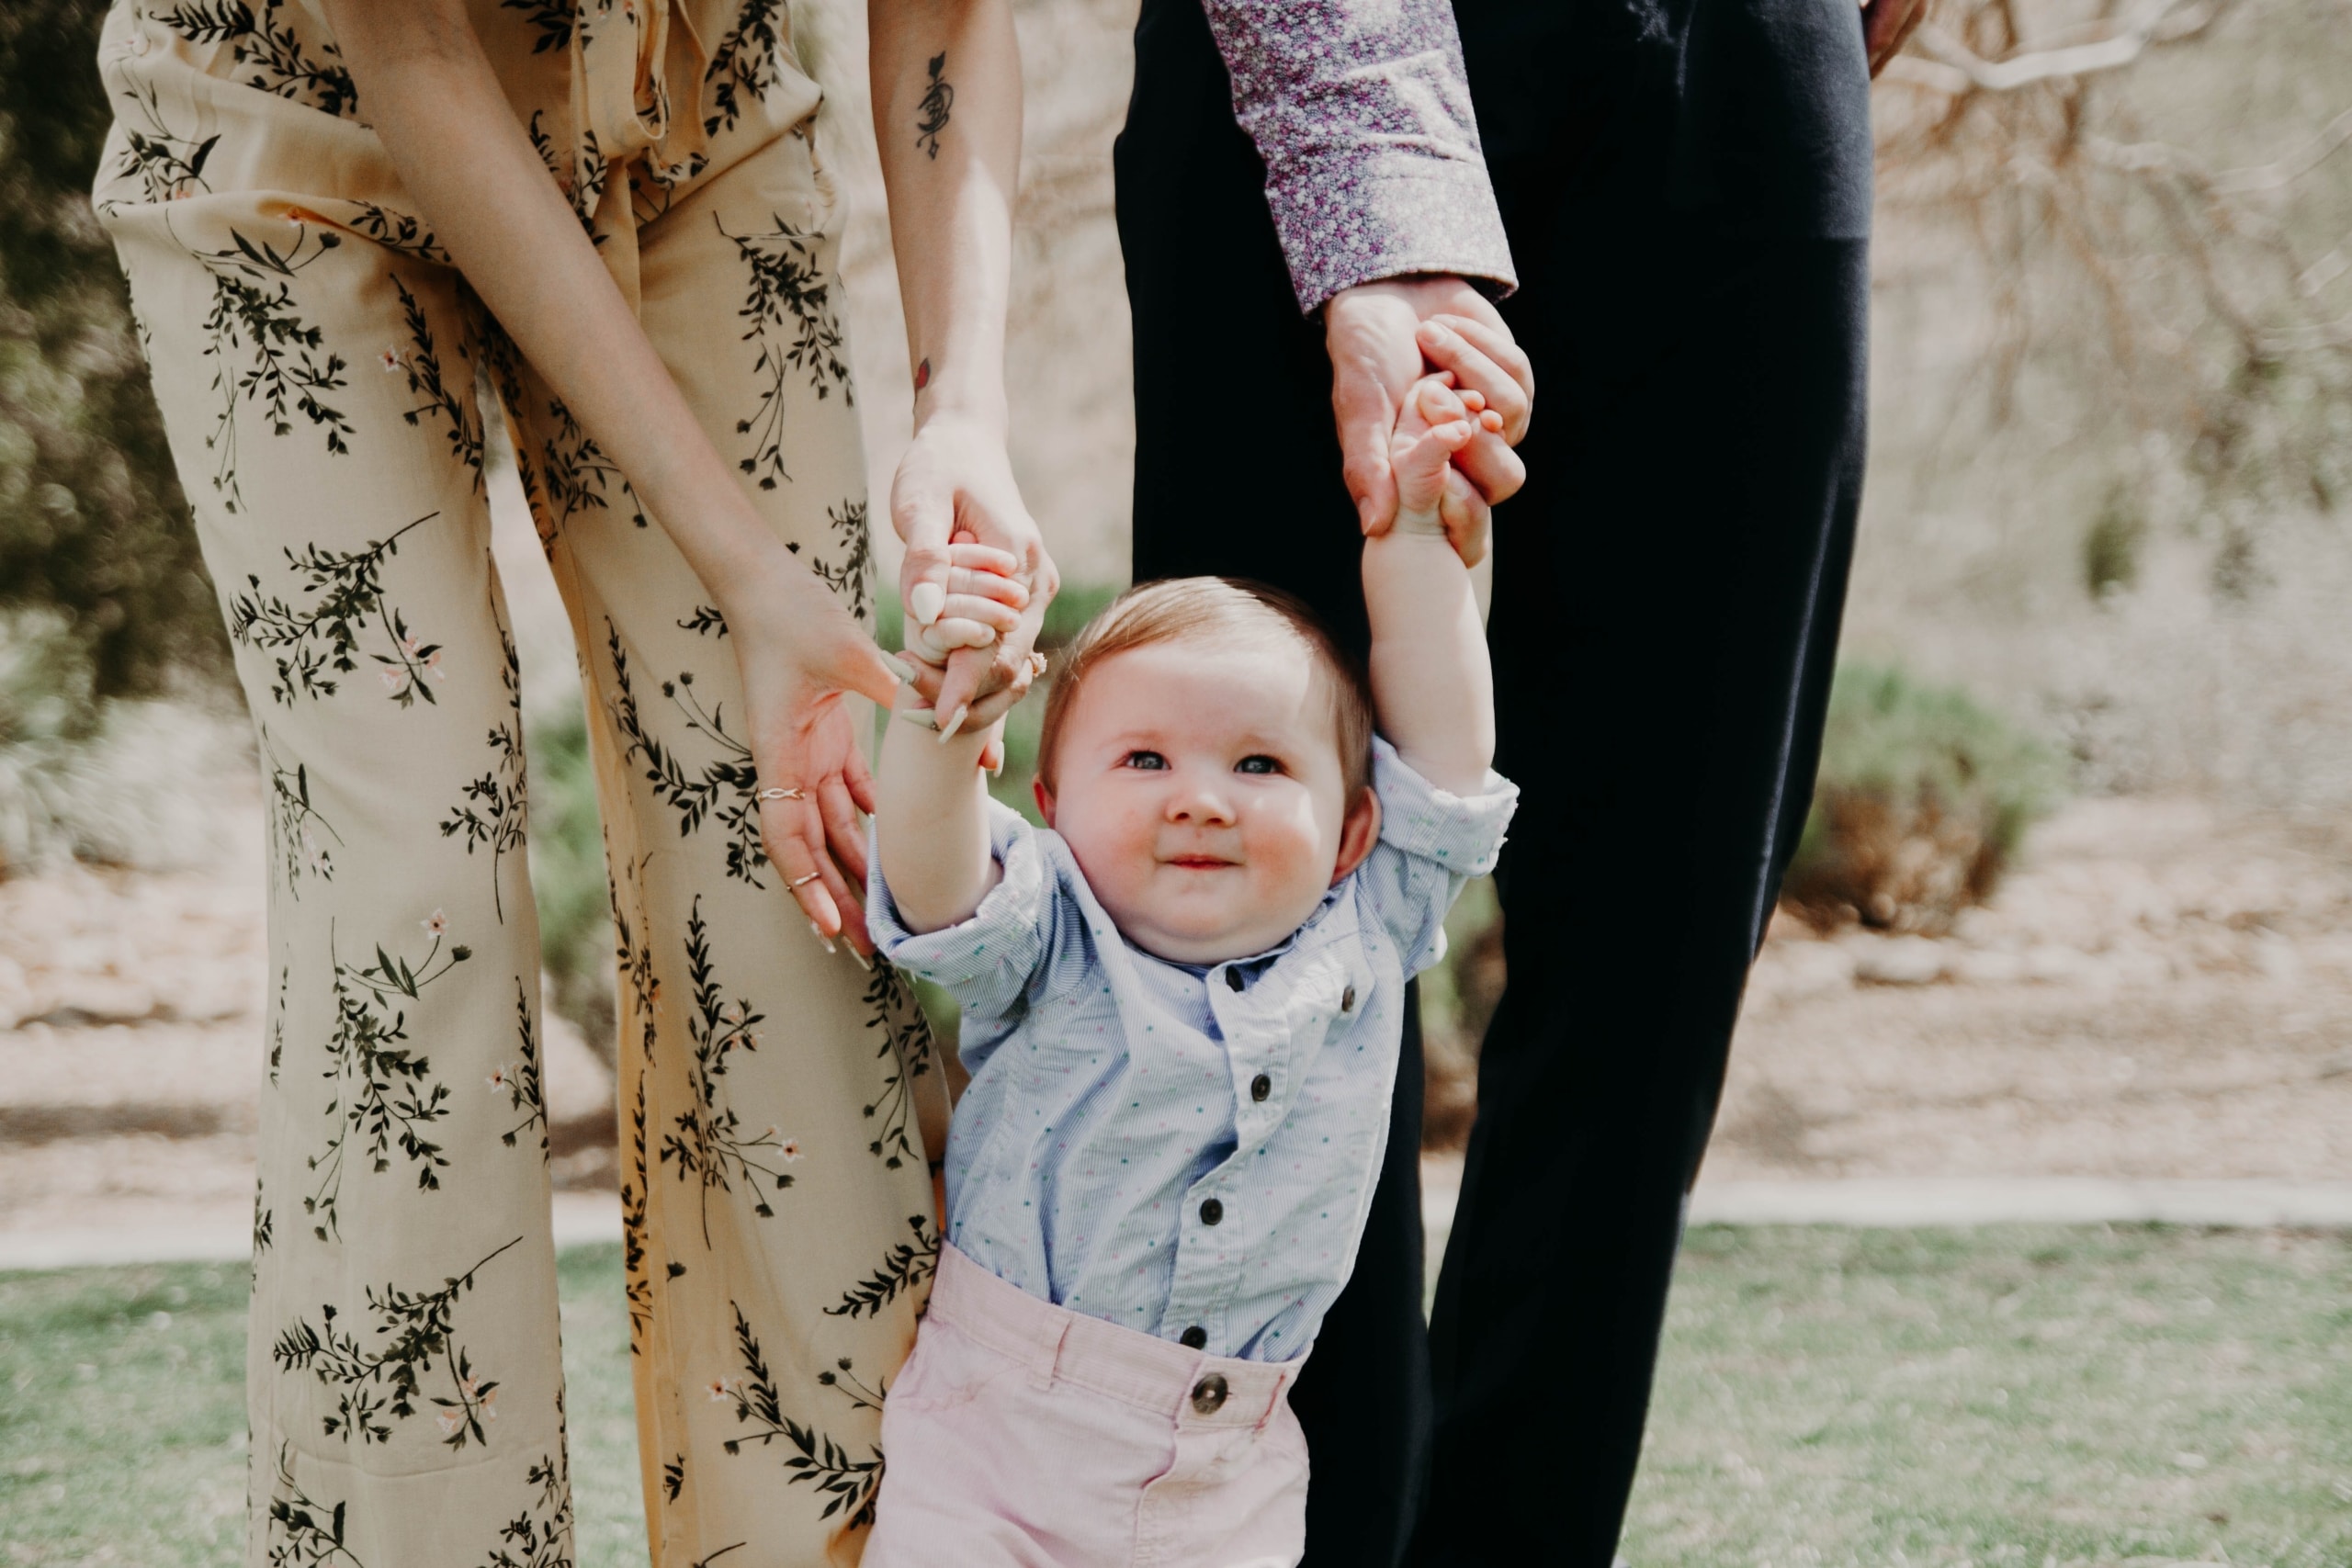 parents hold a baby's hands so it can walk upright